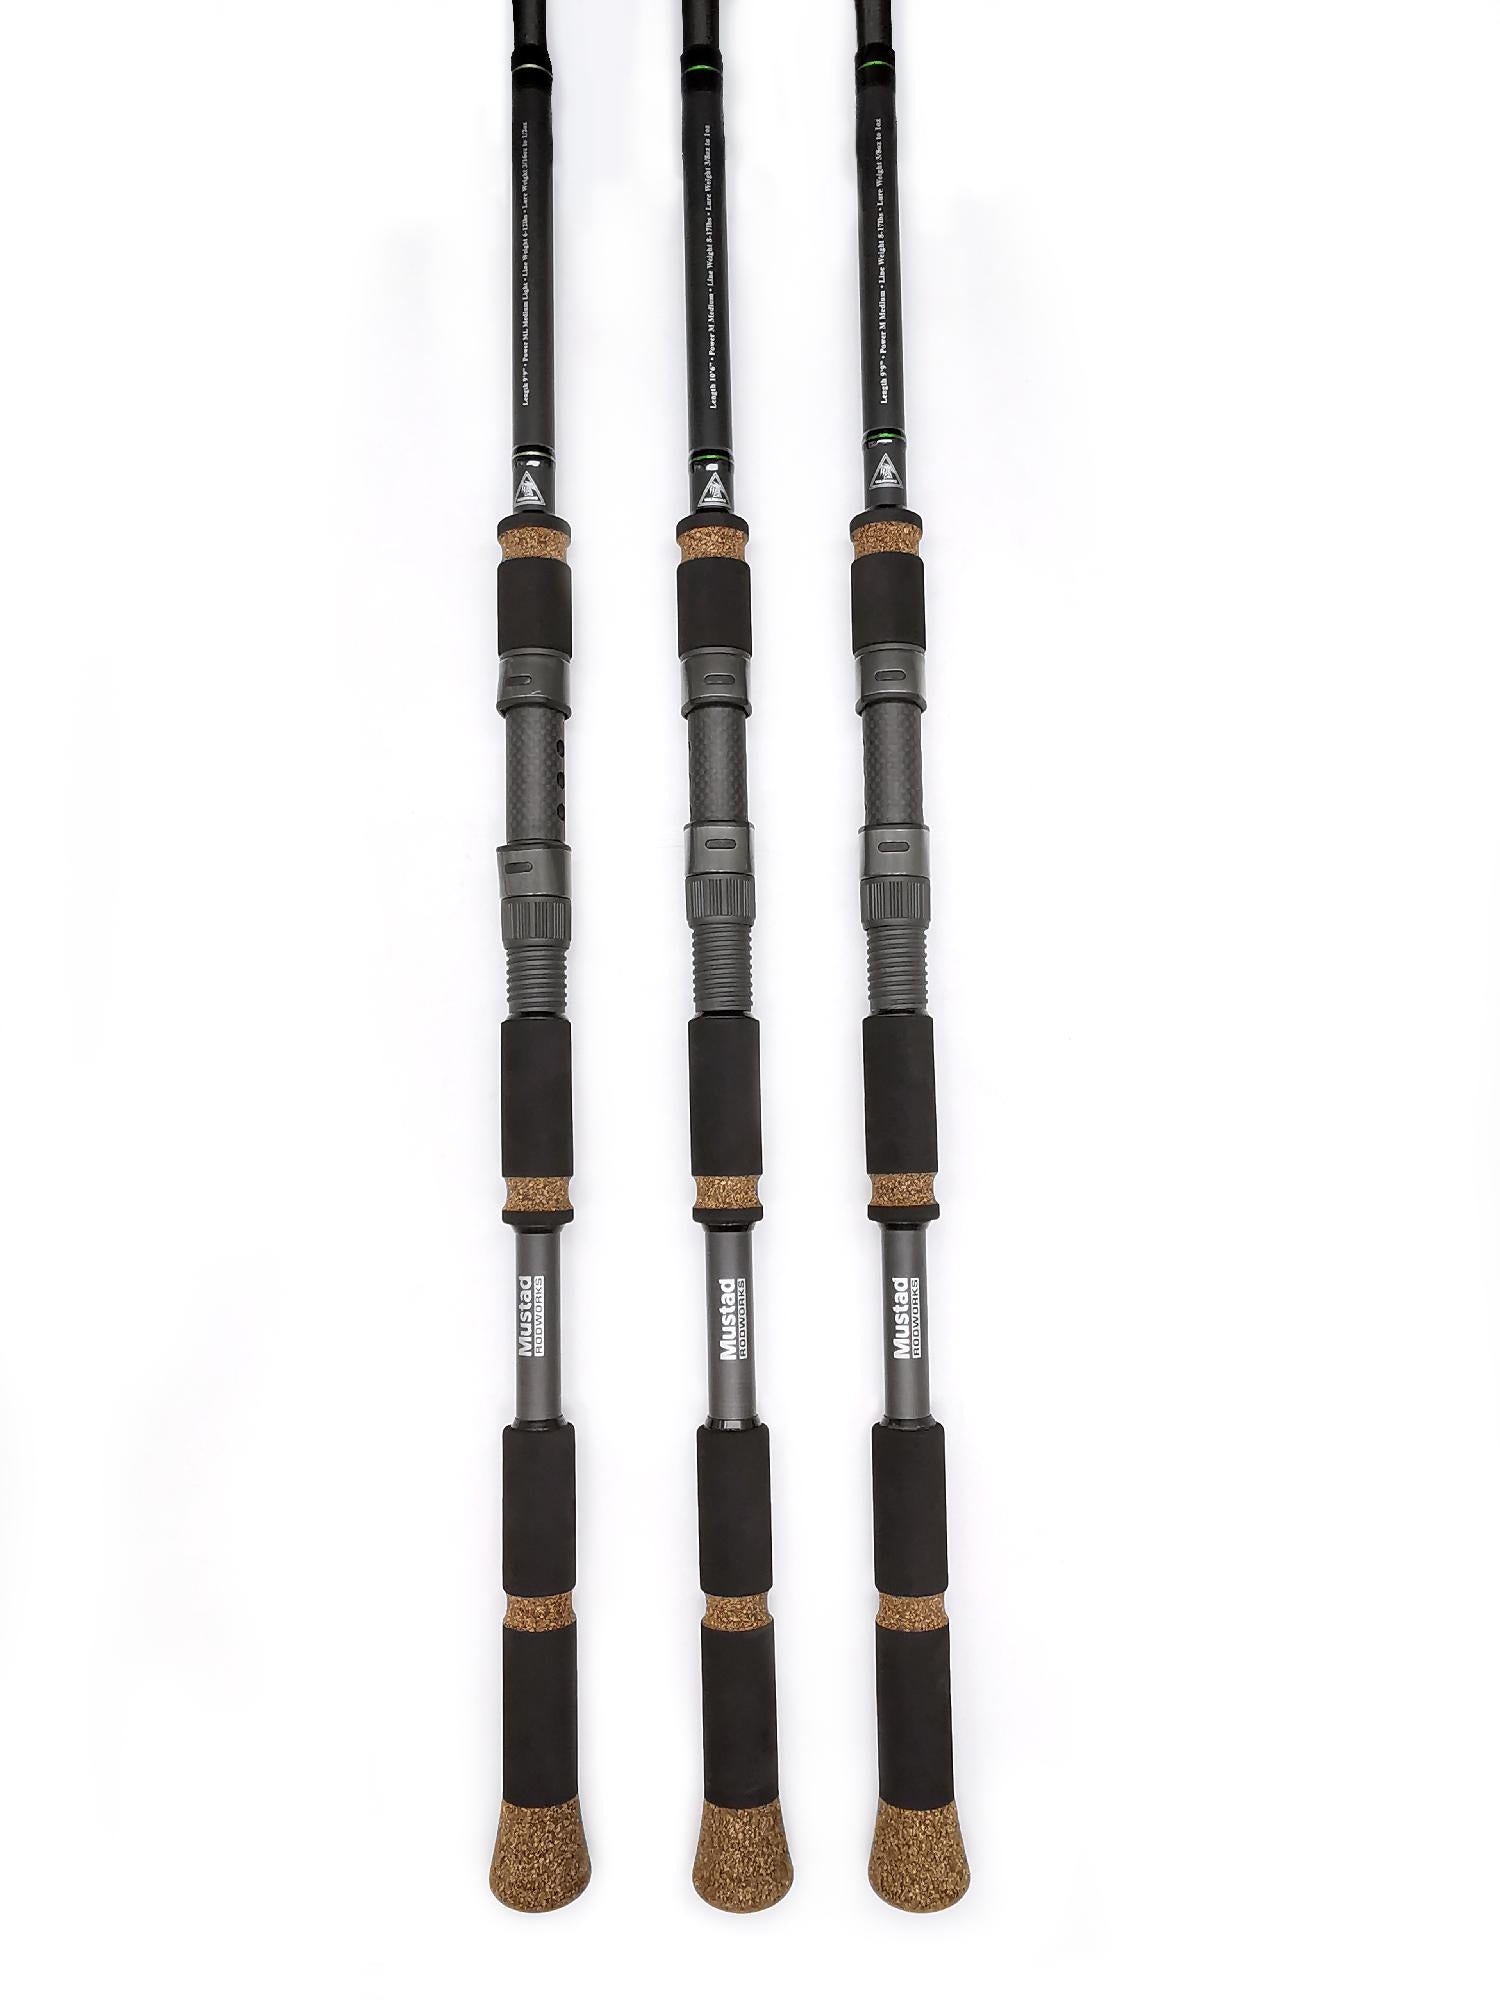 50% OFF SELECT RODS